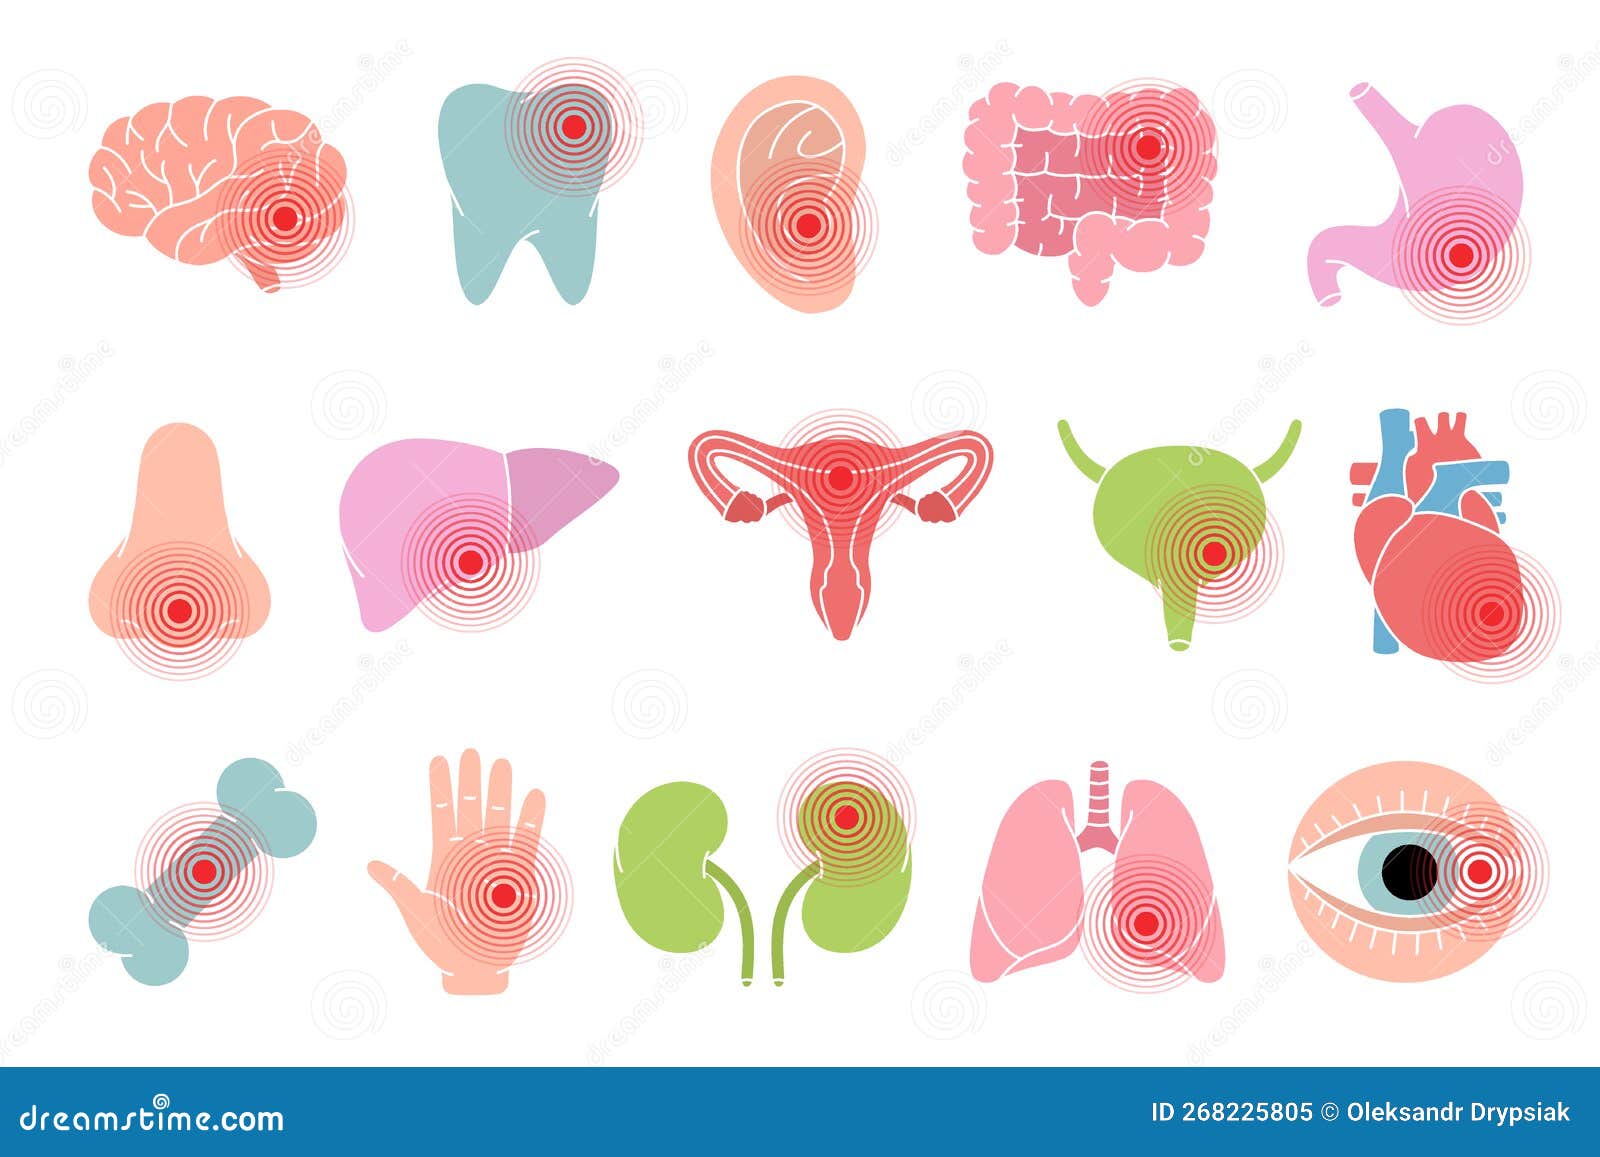 Flank Pain Stock Illustrations – 34 Flank Pain Stock Illustrations, Vectors  & Clipart - Dreamstime